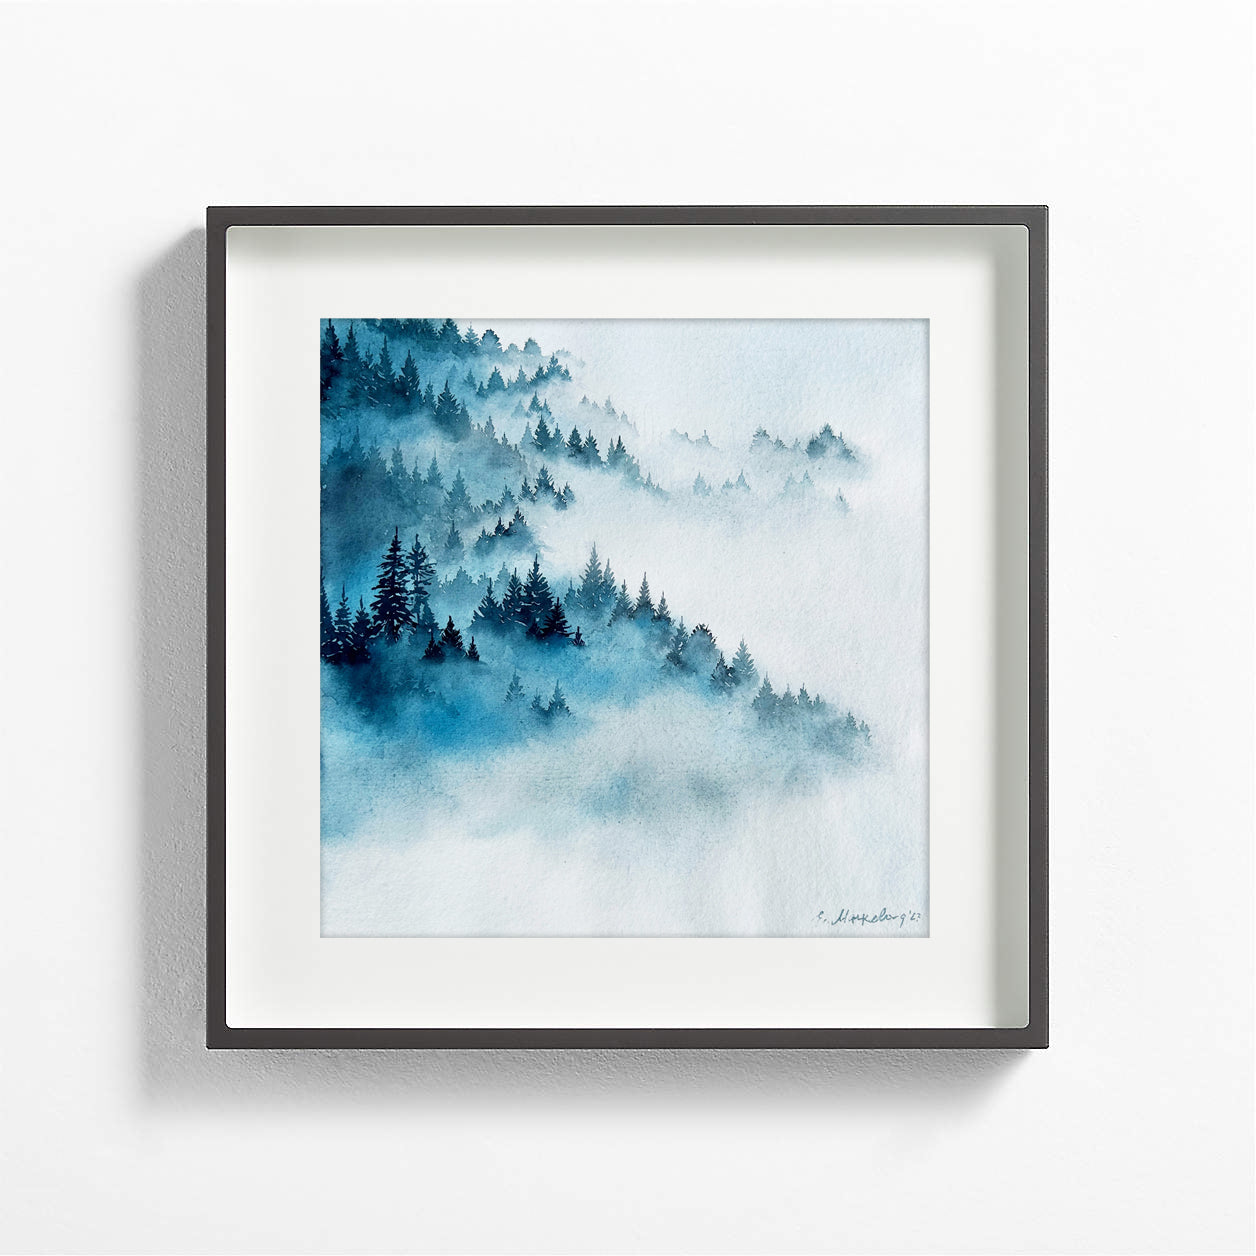 Beyond the Clouds - Original Watercolor Painting